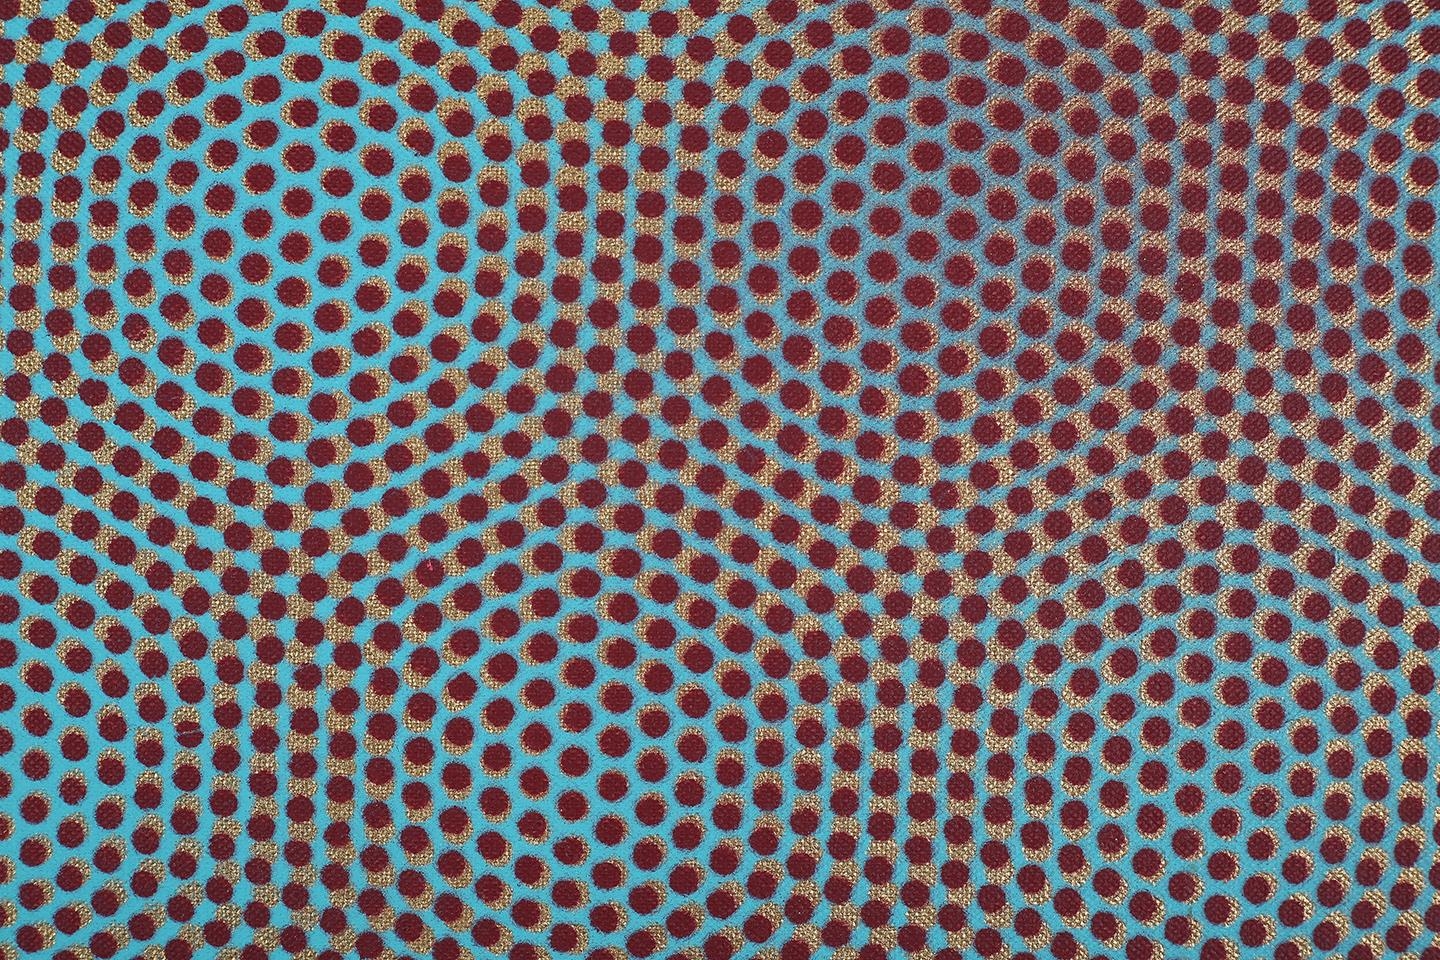 ARR Kate Allen, 20th/21st century, Gold, pattern of brown overlapping gold on turquoise, oil on - Image 3 of 3